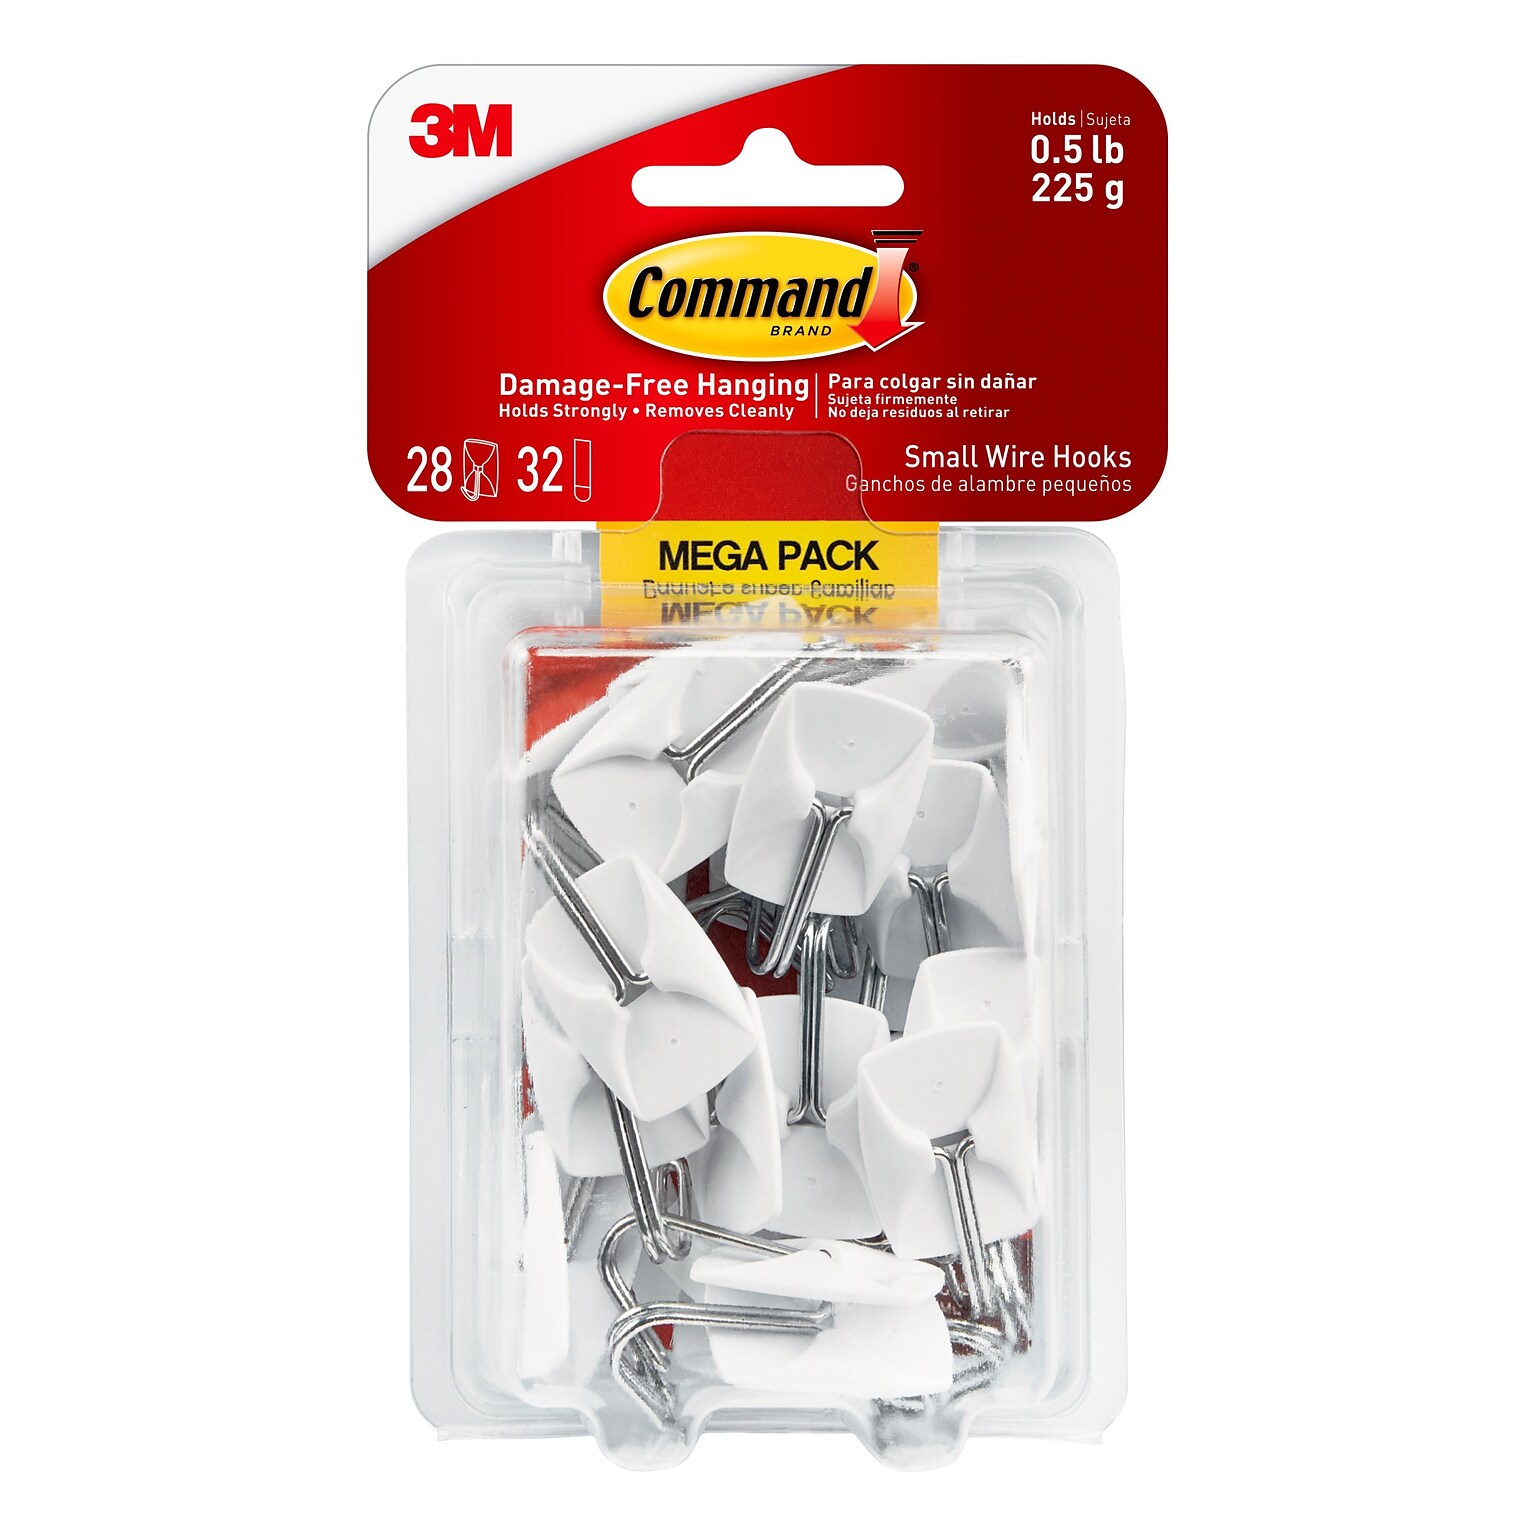 Command Small Wire Toggle Hooks, White, Damage Free Organizing of Dorm Rooms, 28 Hooks, 32 Command Strips (17067-MPESBU)